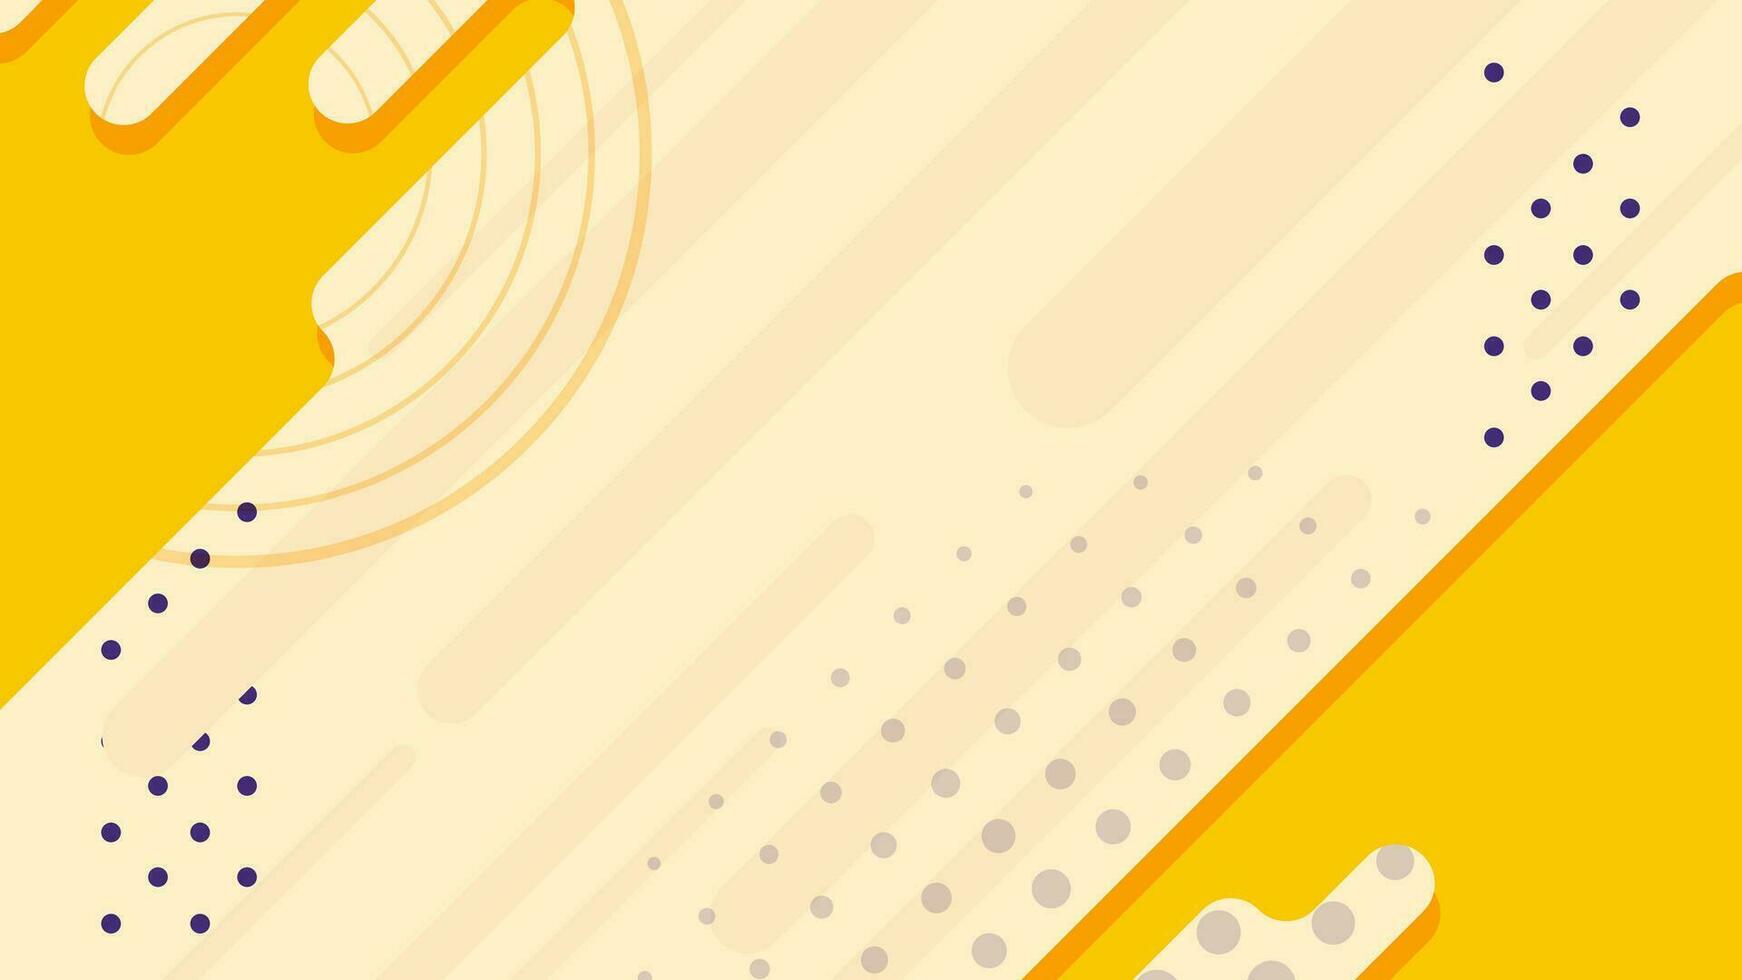 Abstract fluid background with yellow shape vector